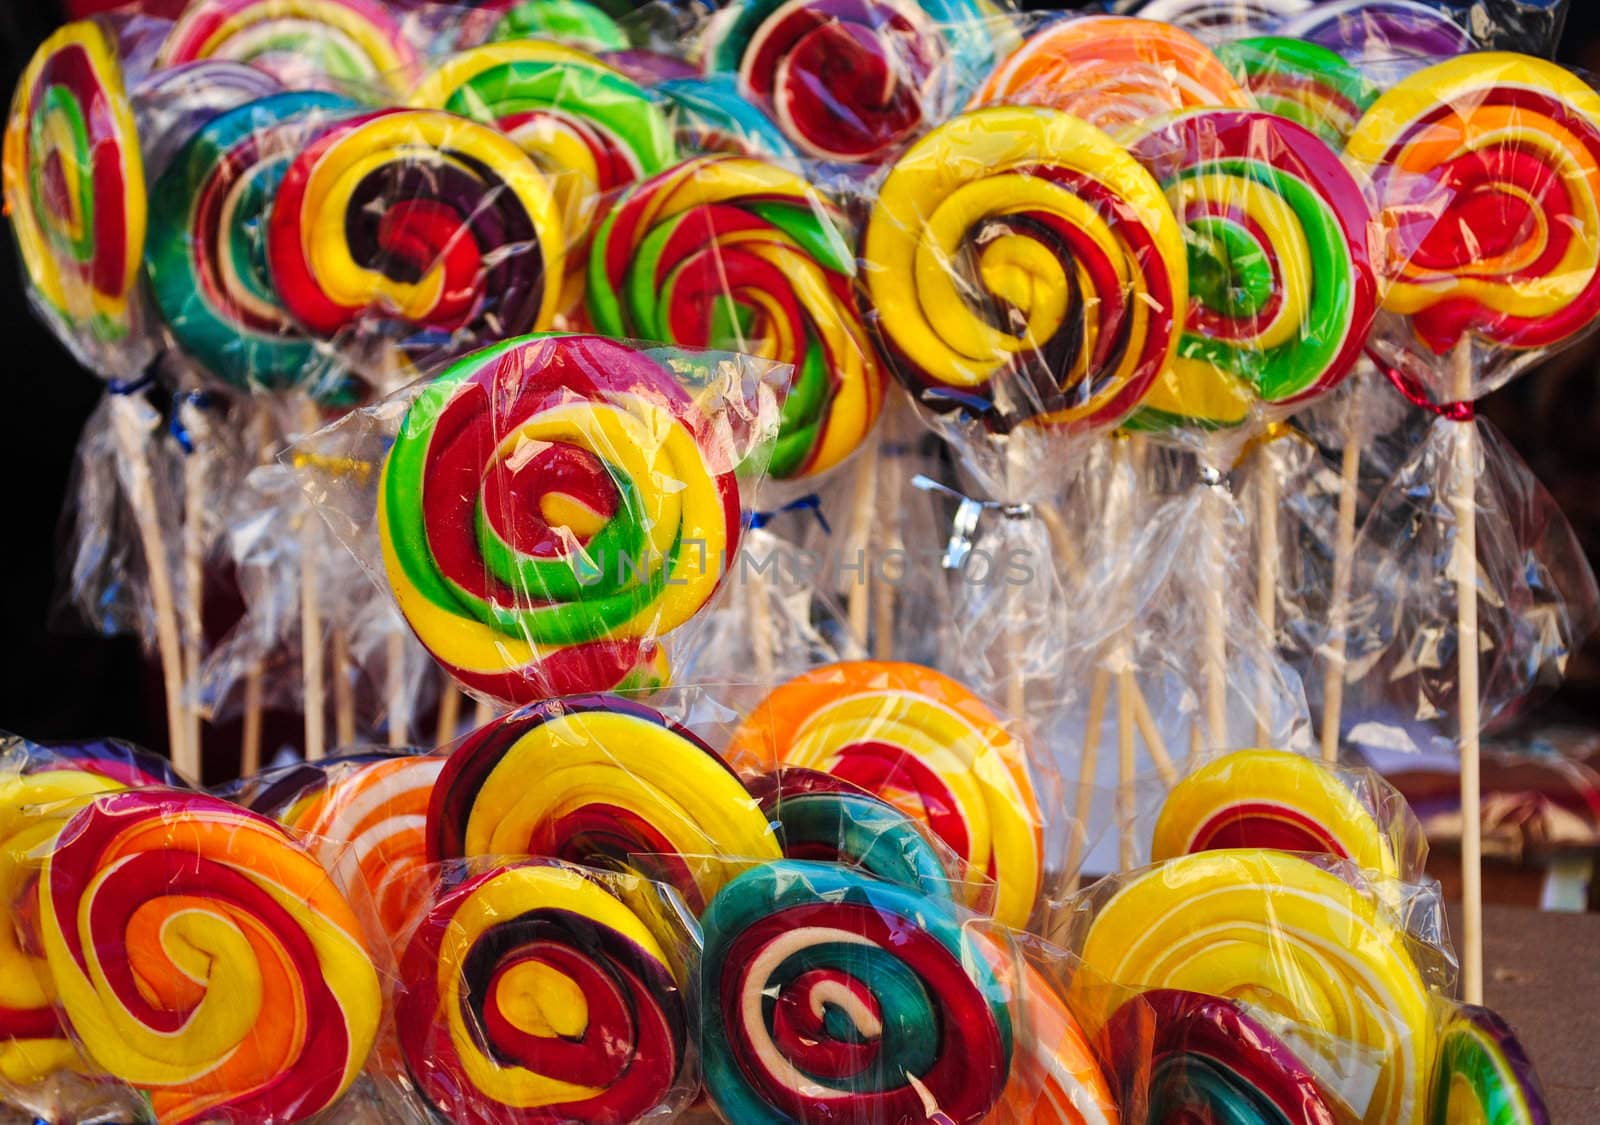 Many colourful lollipops, with yellow, red and green